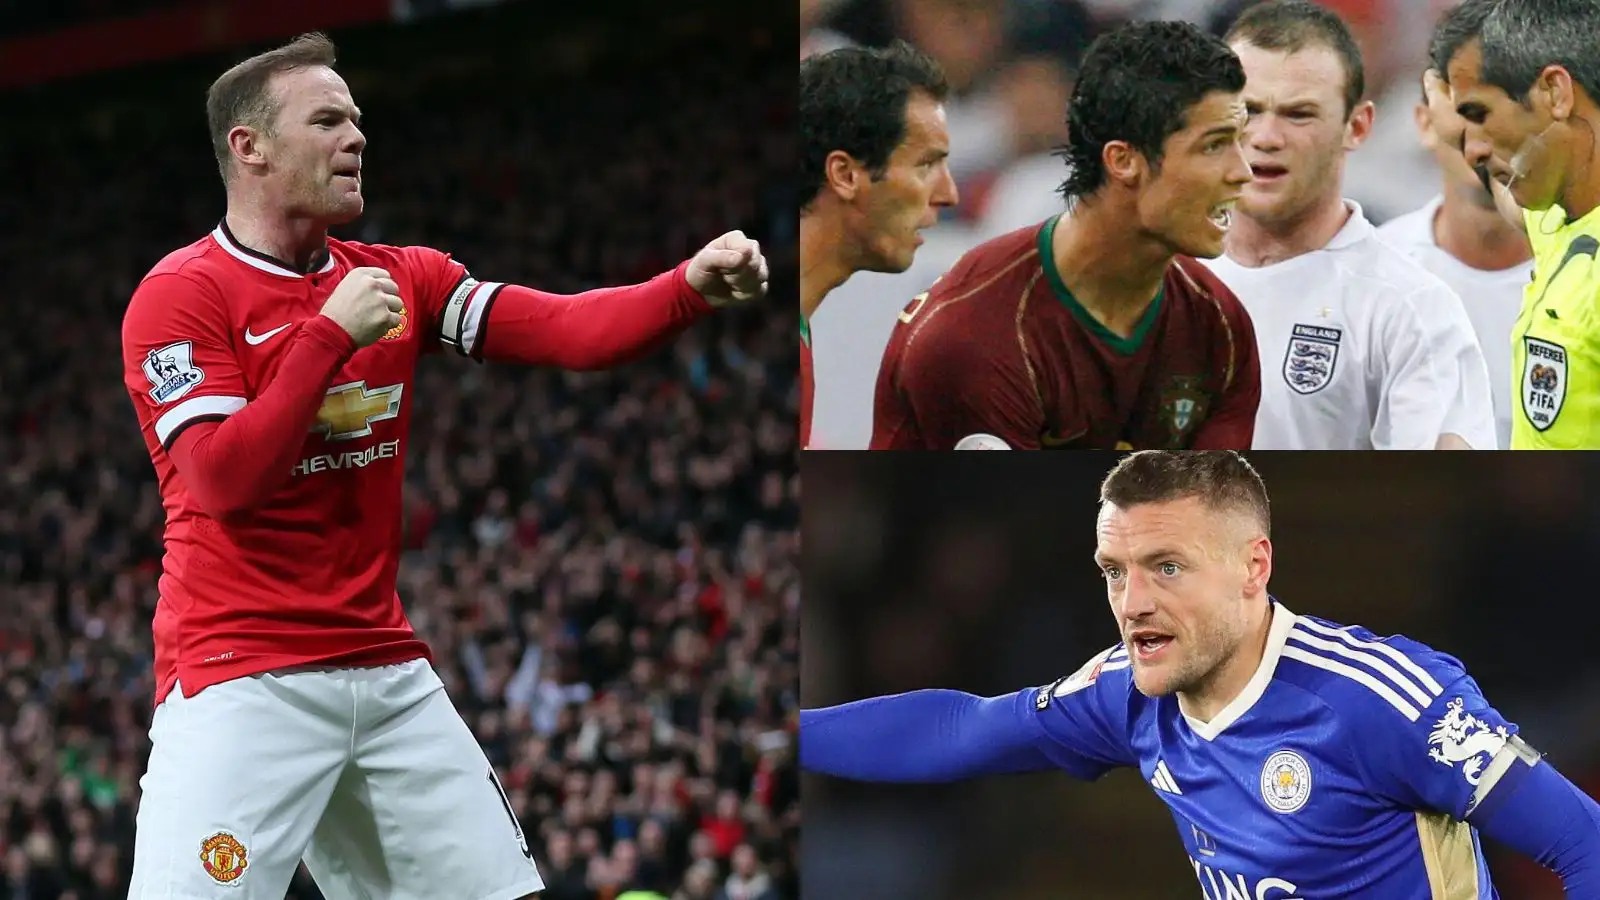 Vardy, Ronaldo among five opponents for Rooney as Man Utd legend prepares for Misfits Boxing debut